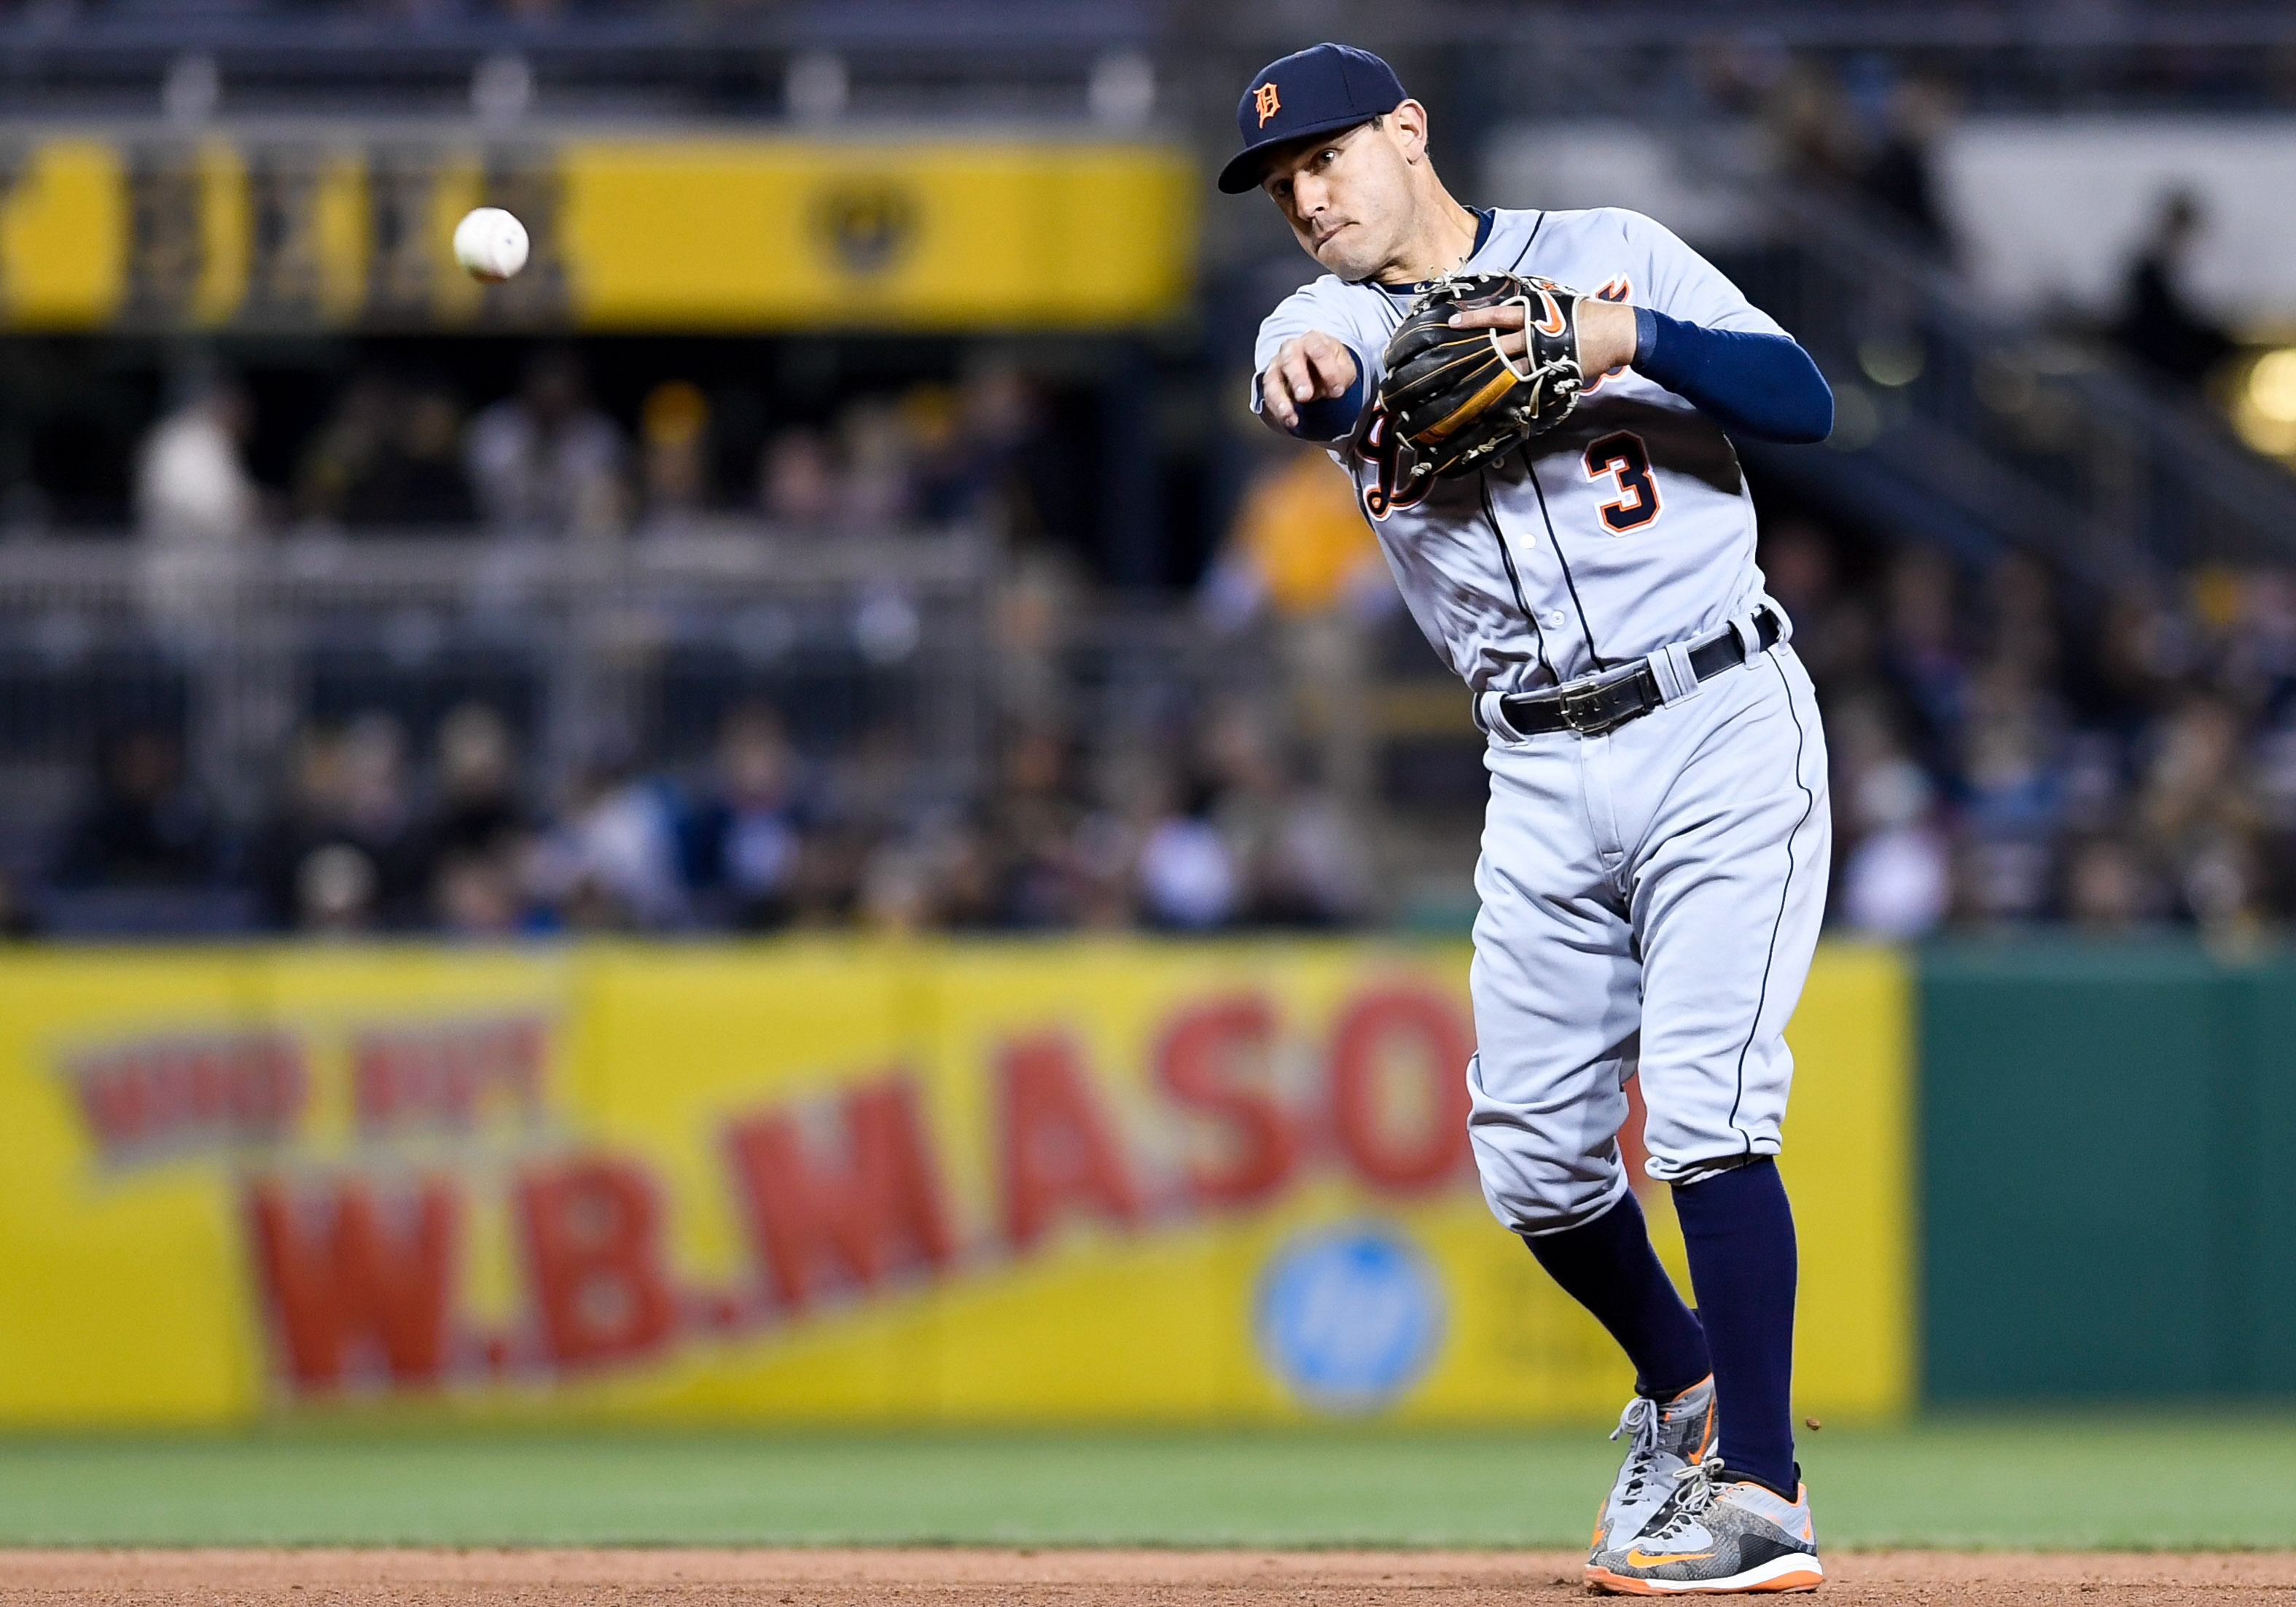 Tigers Trade Fielder for Kinsler - The New York Times